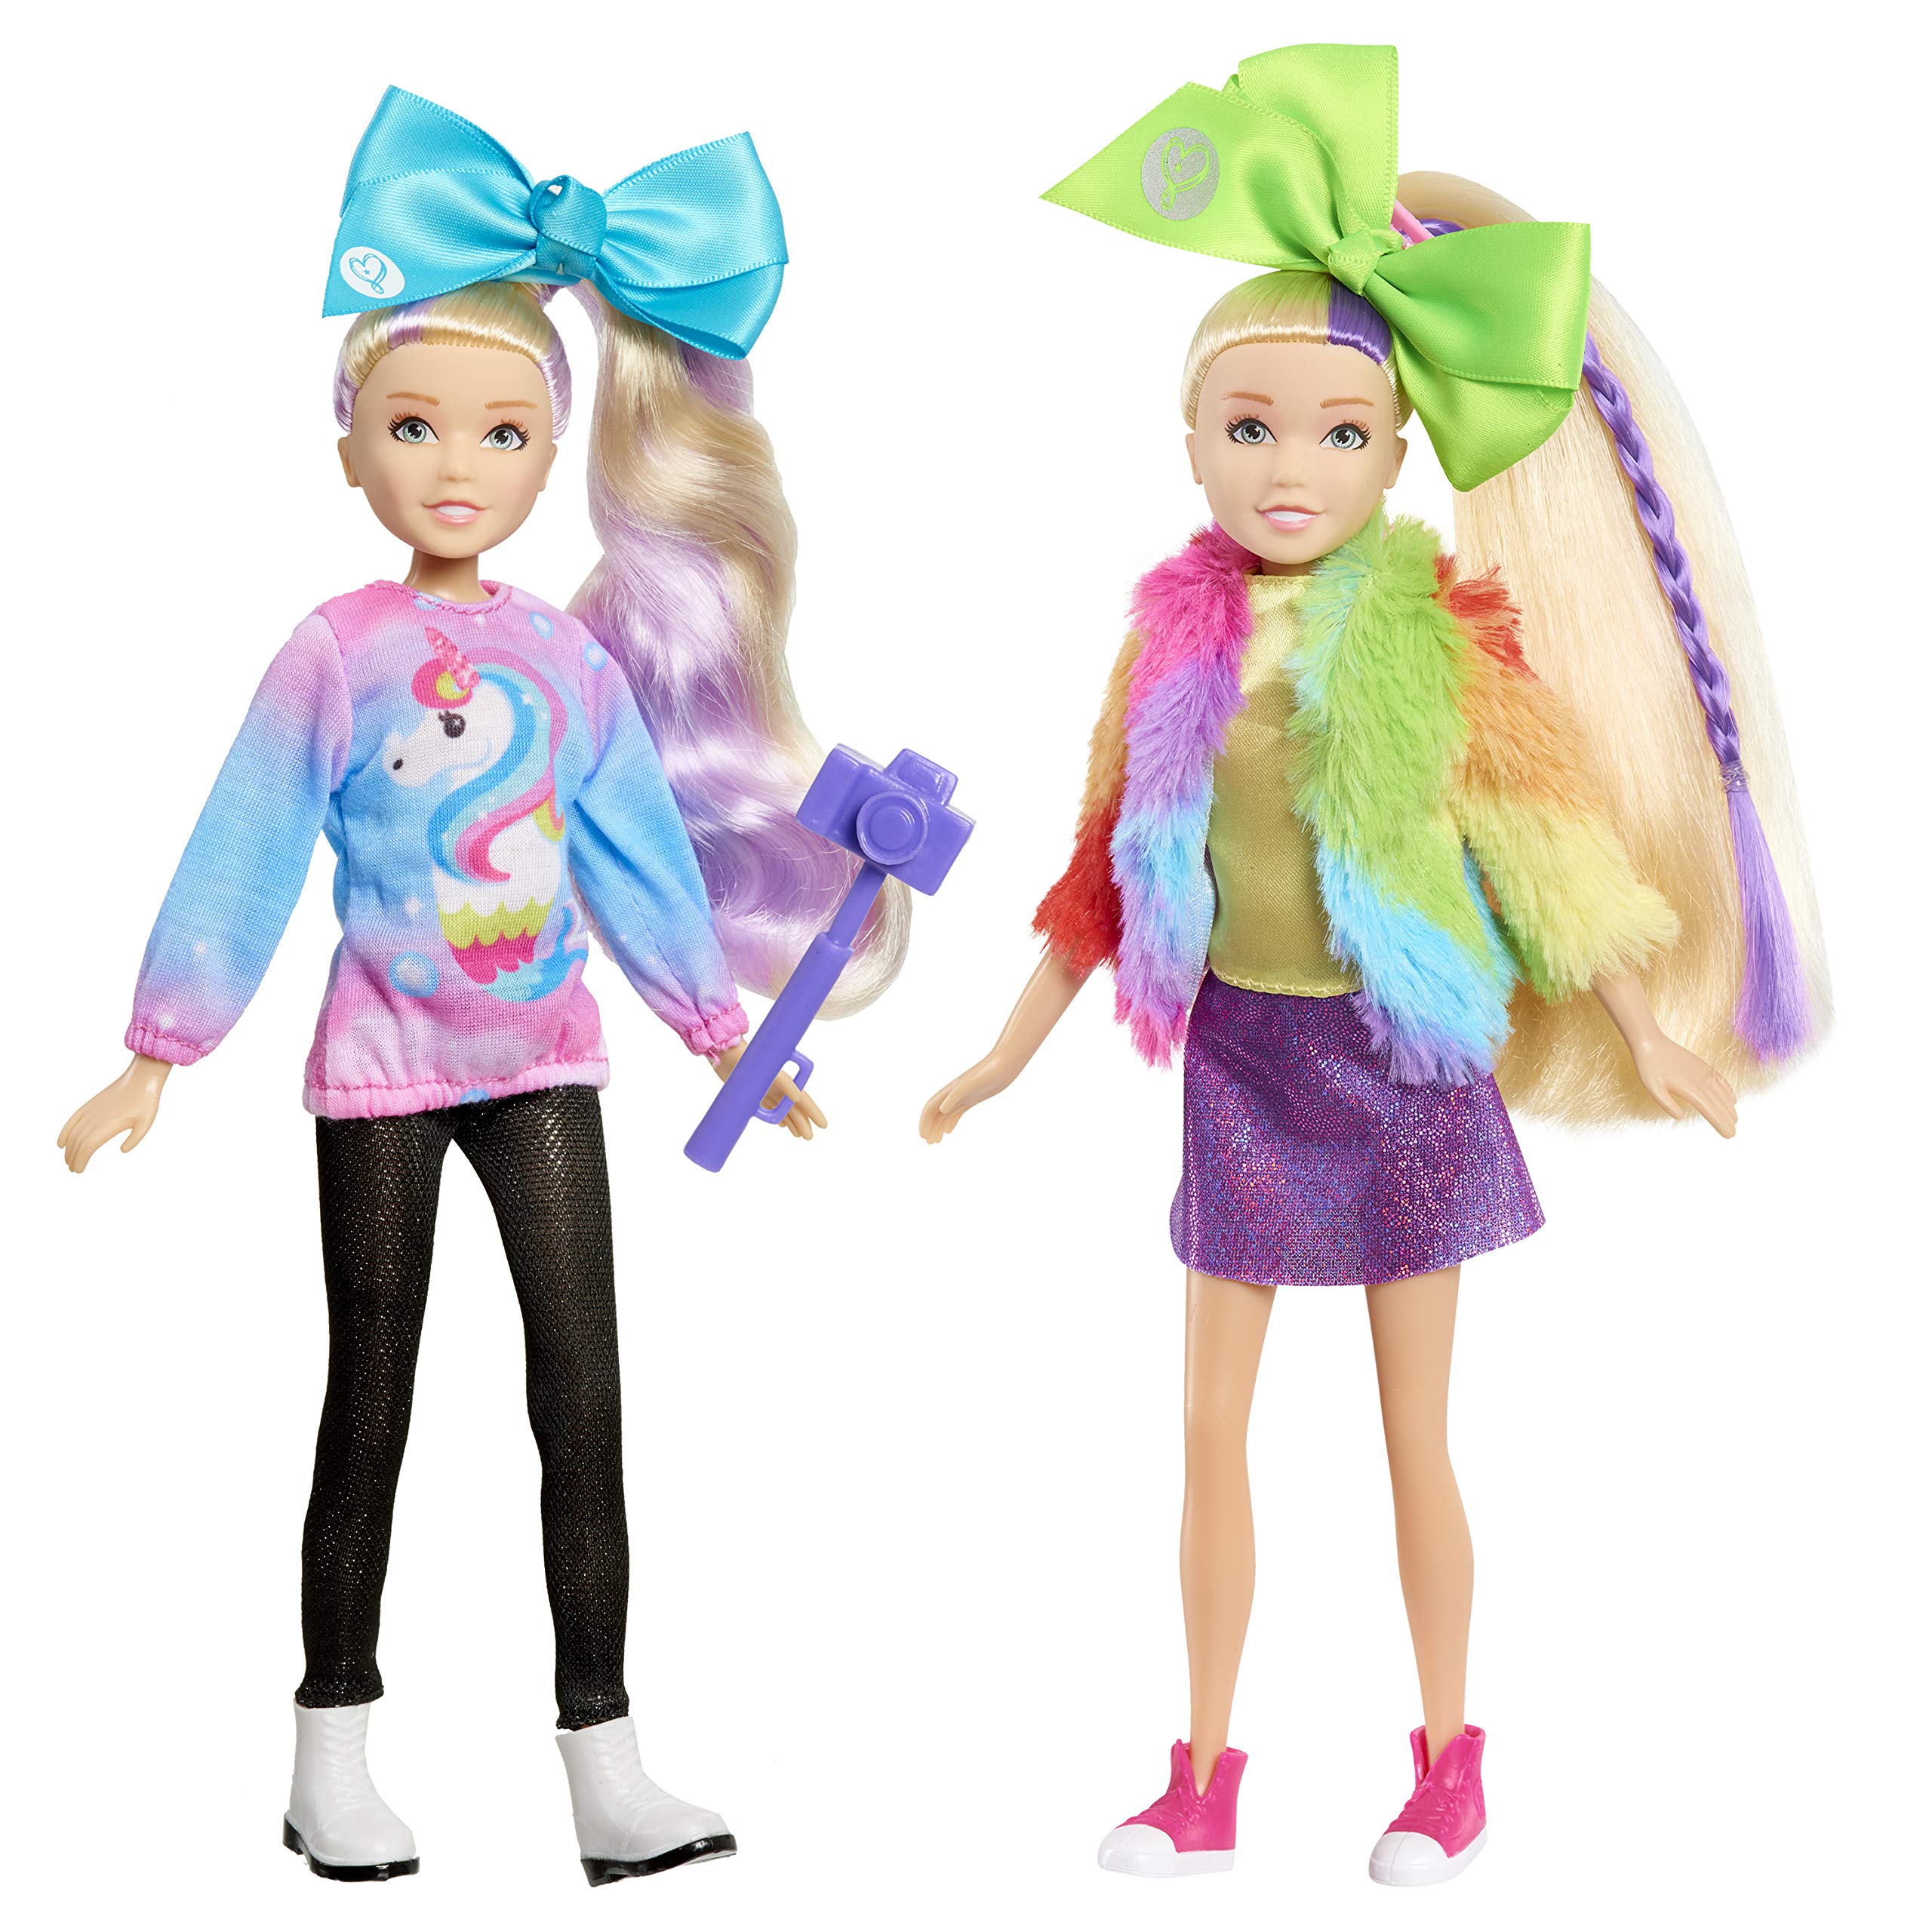 JoJo Siwa Fashion Doll, TV host, 10-inch doll, Kids Toys for Ages 3 Up, Gifts and Presents by Just Play